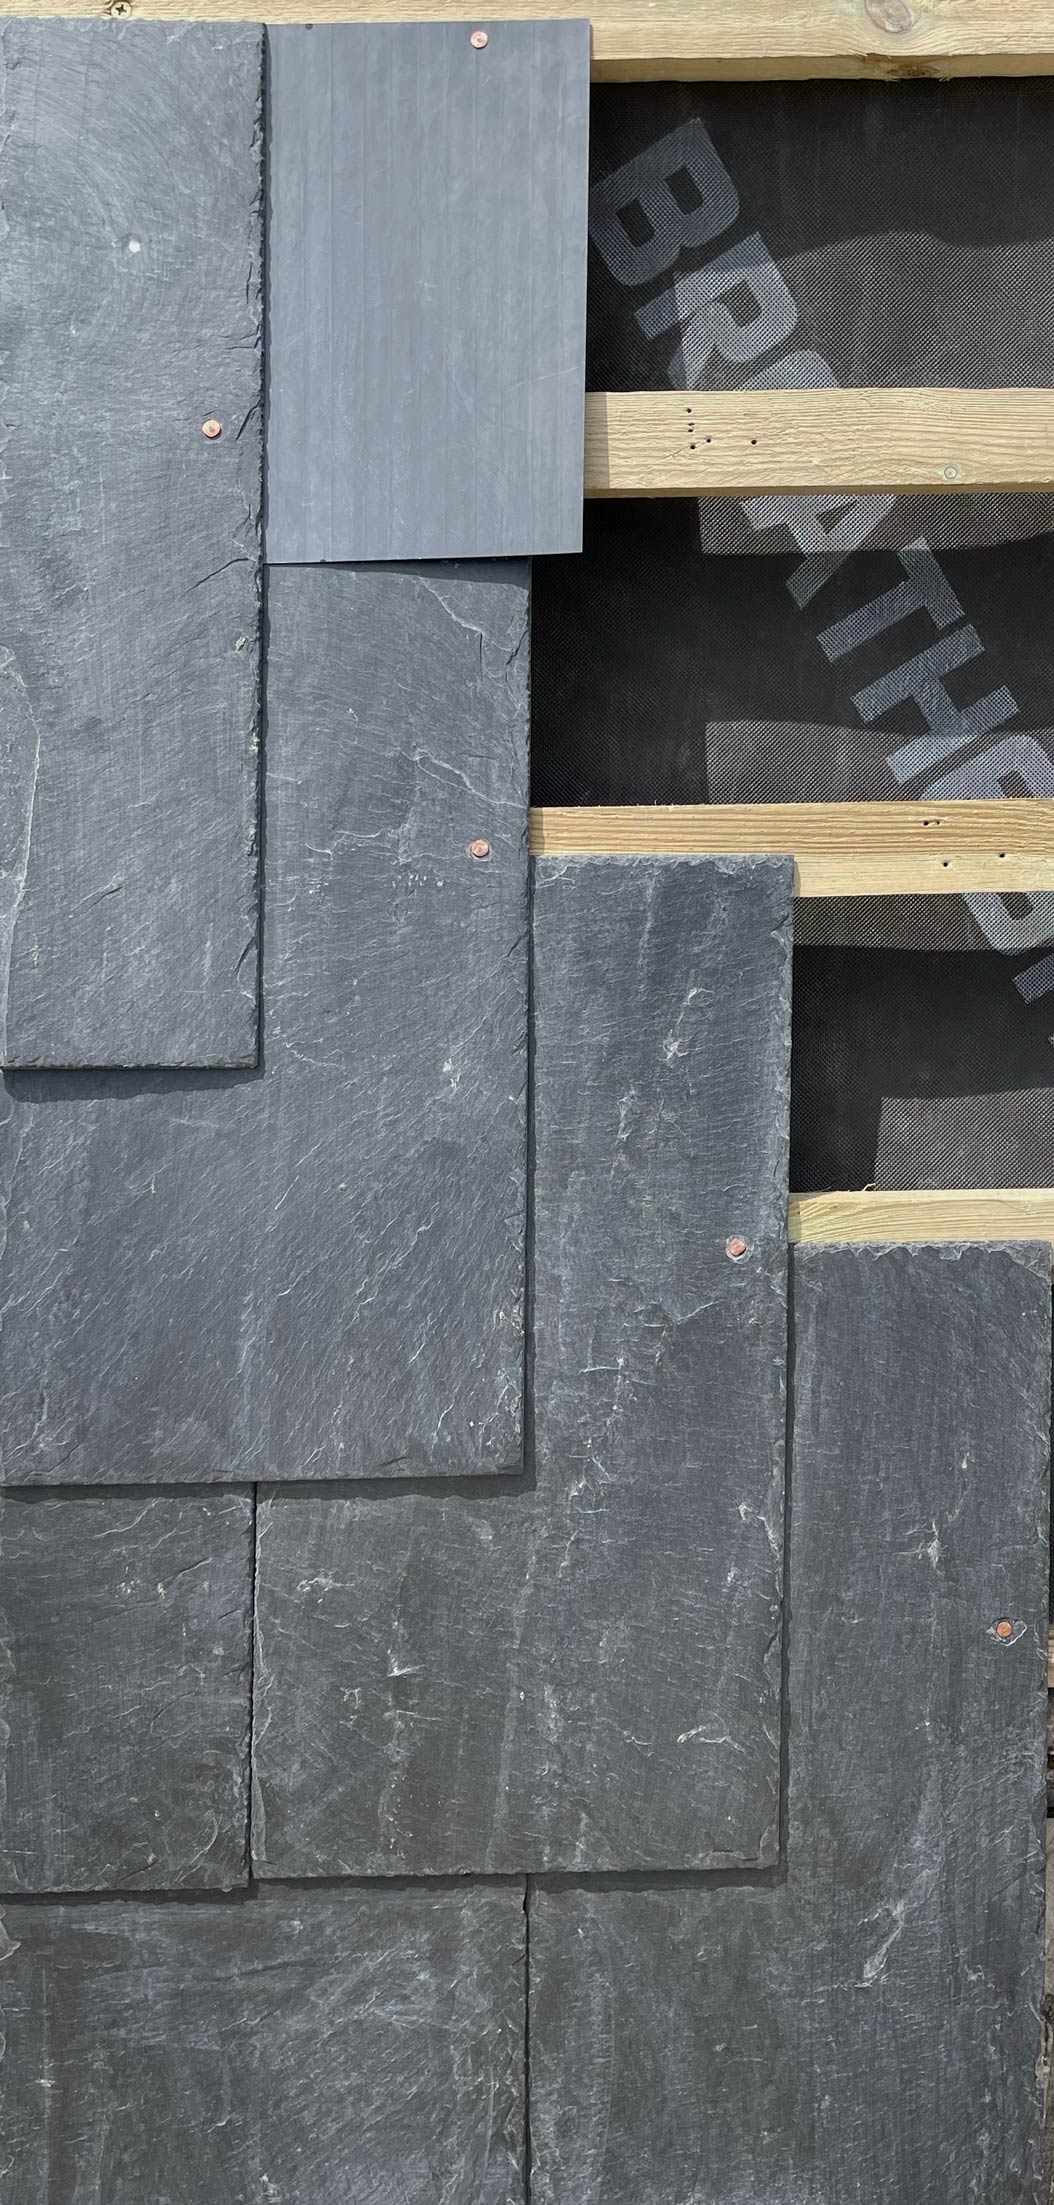 VERGE SLATE AND HALF SHORTAGE SOLUTION